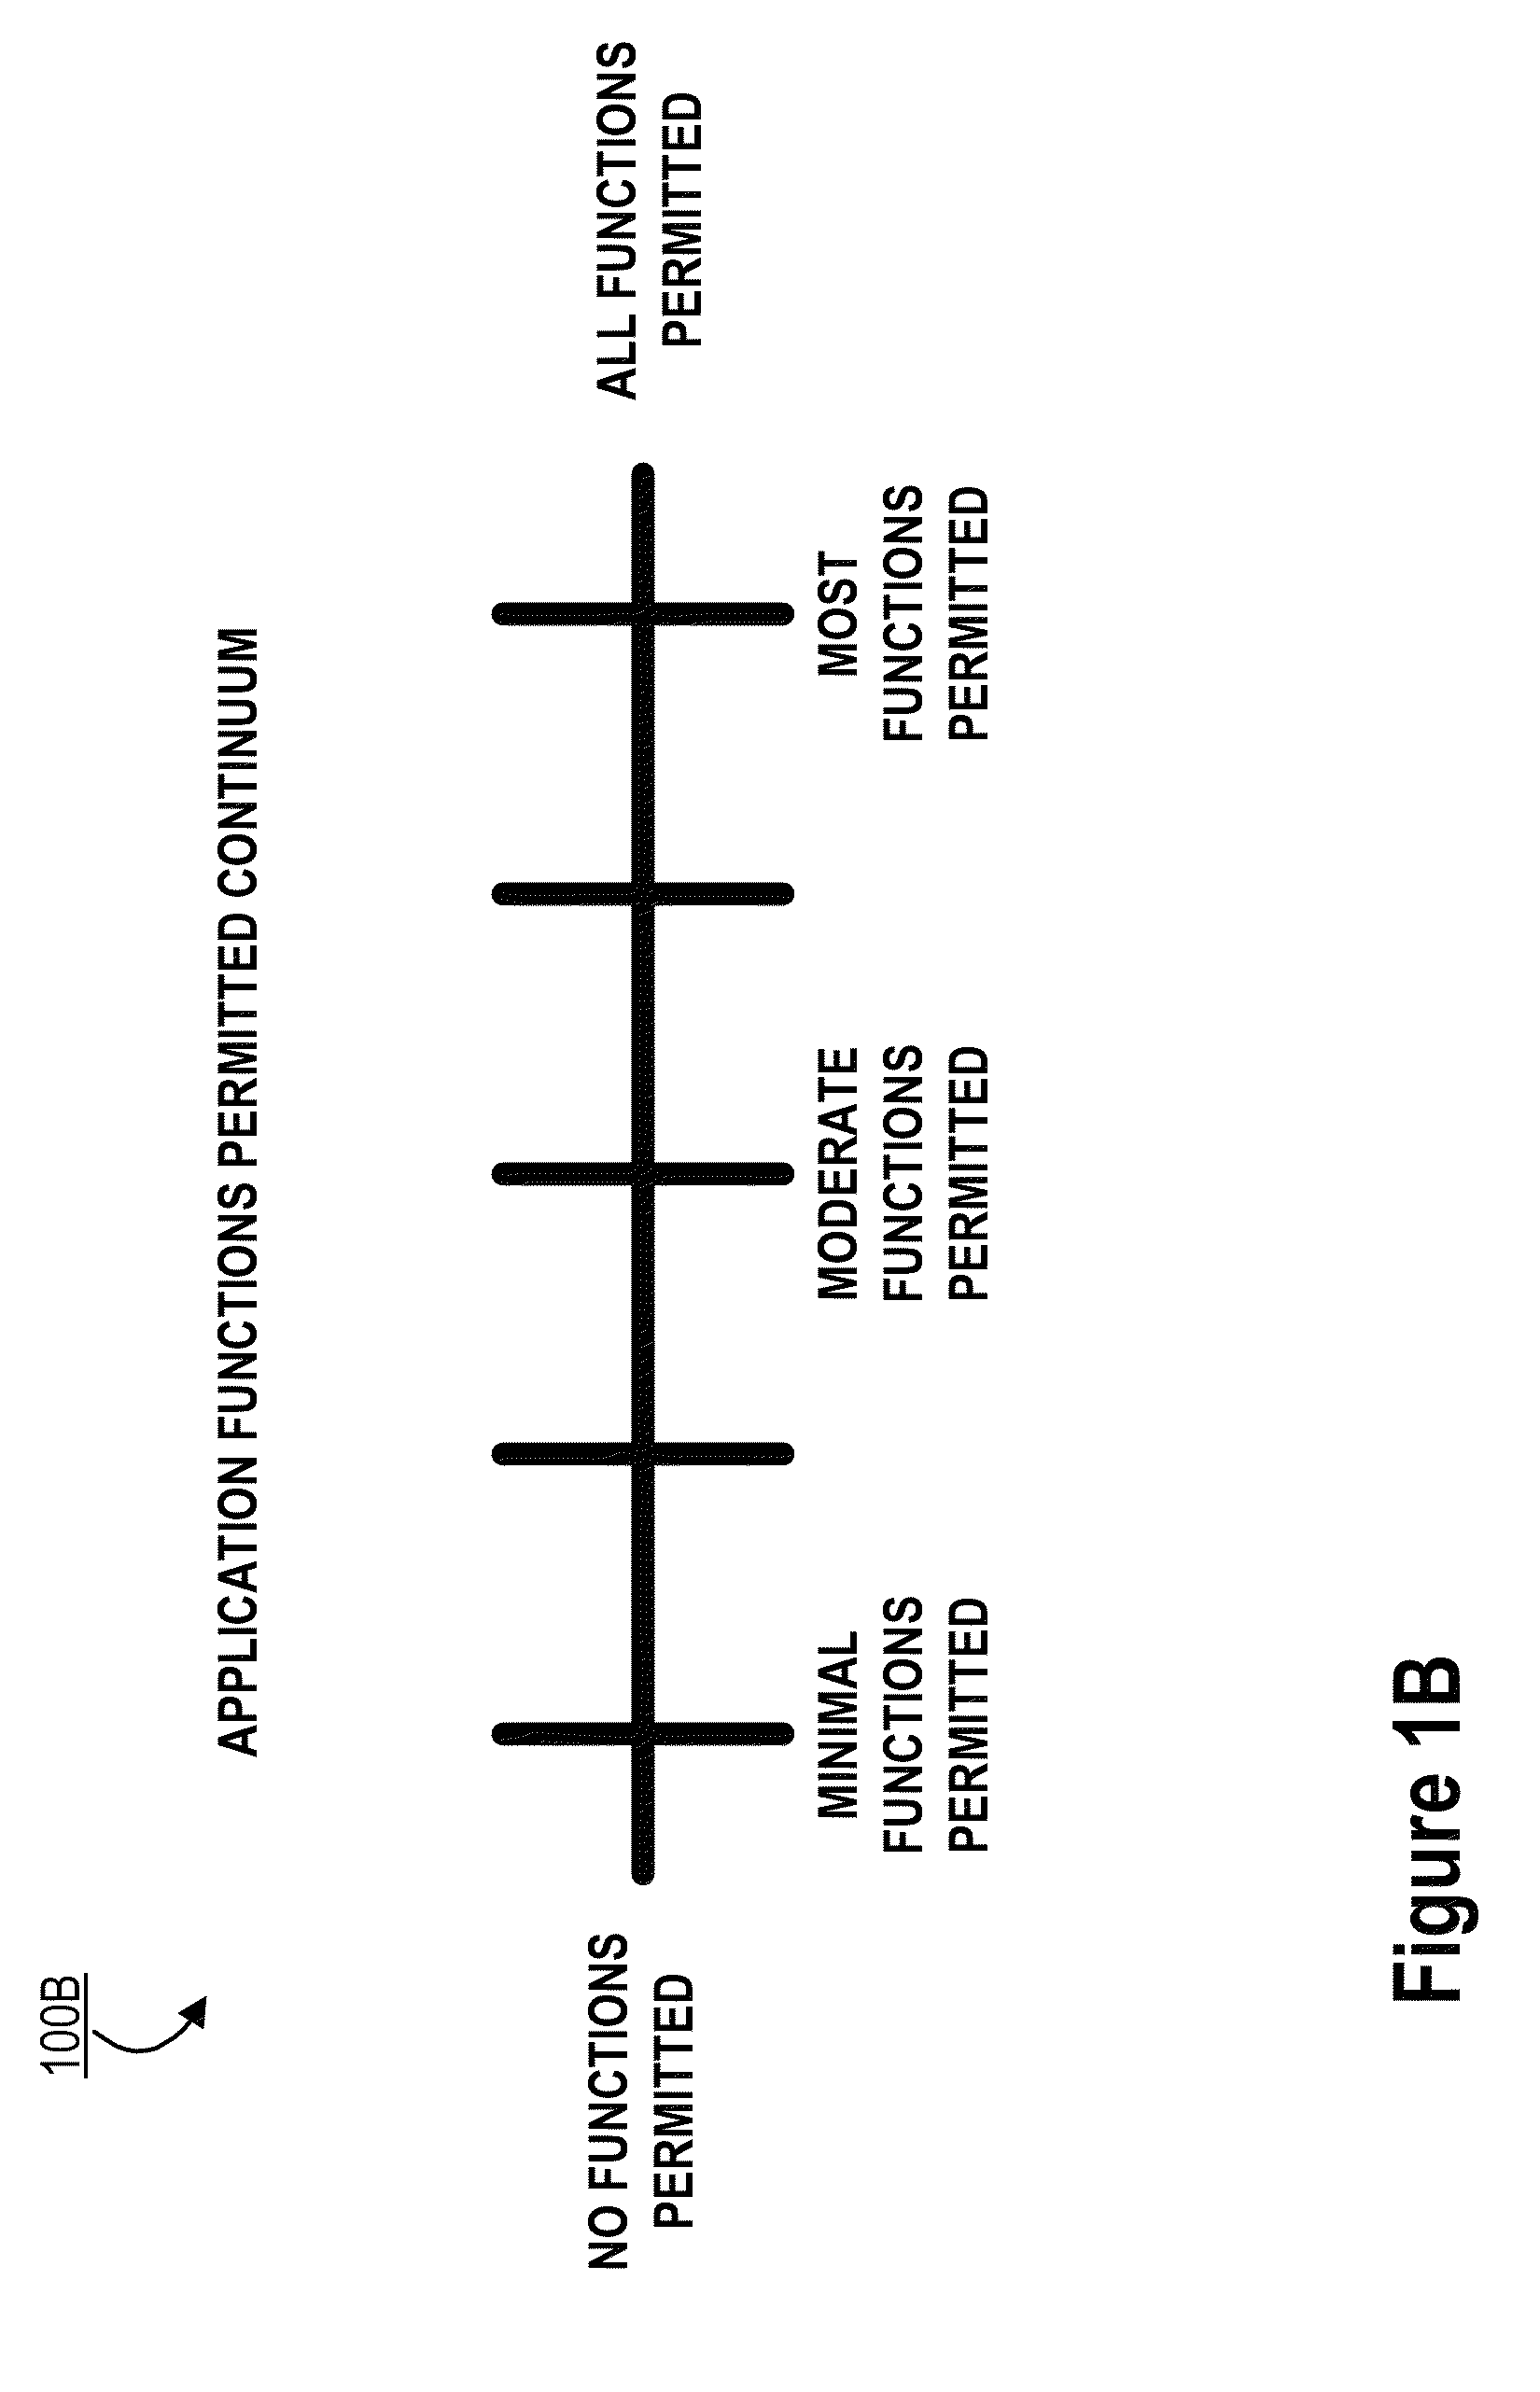 Providing authentication using previously-validated authentication credentials